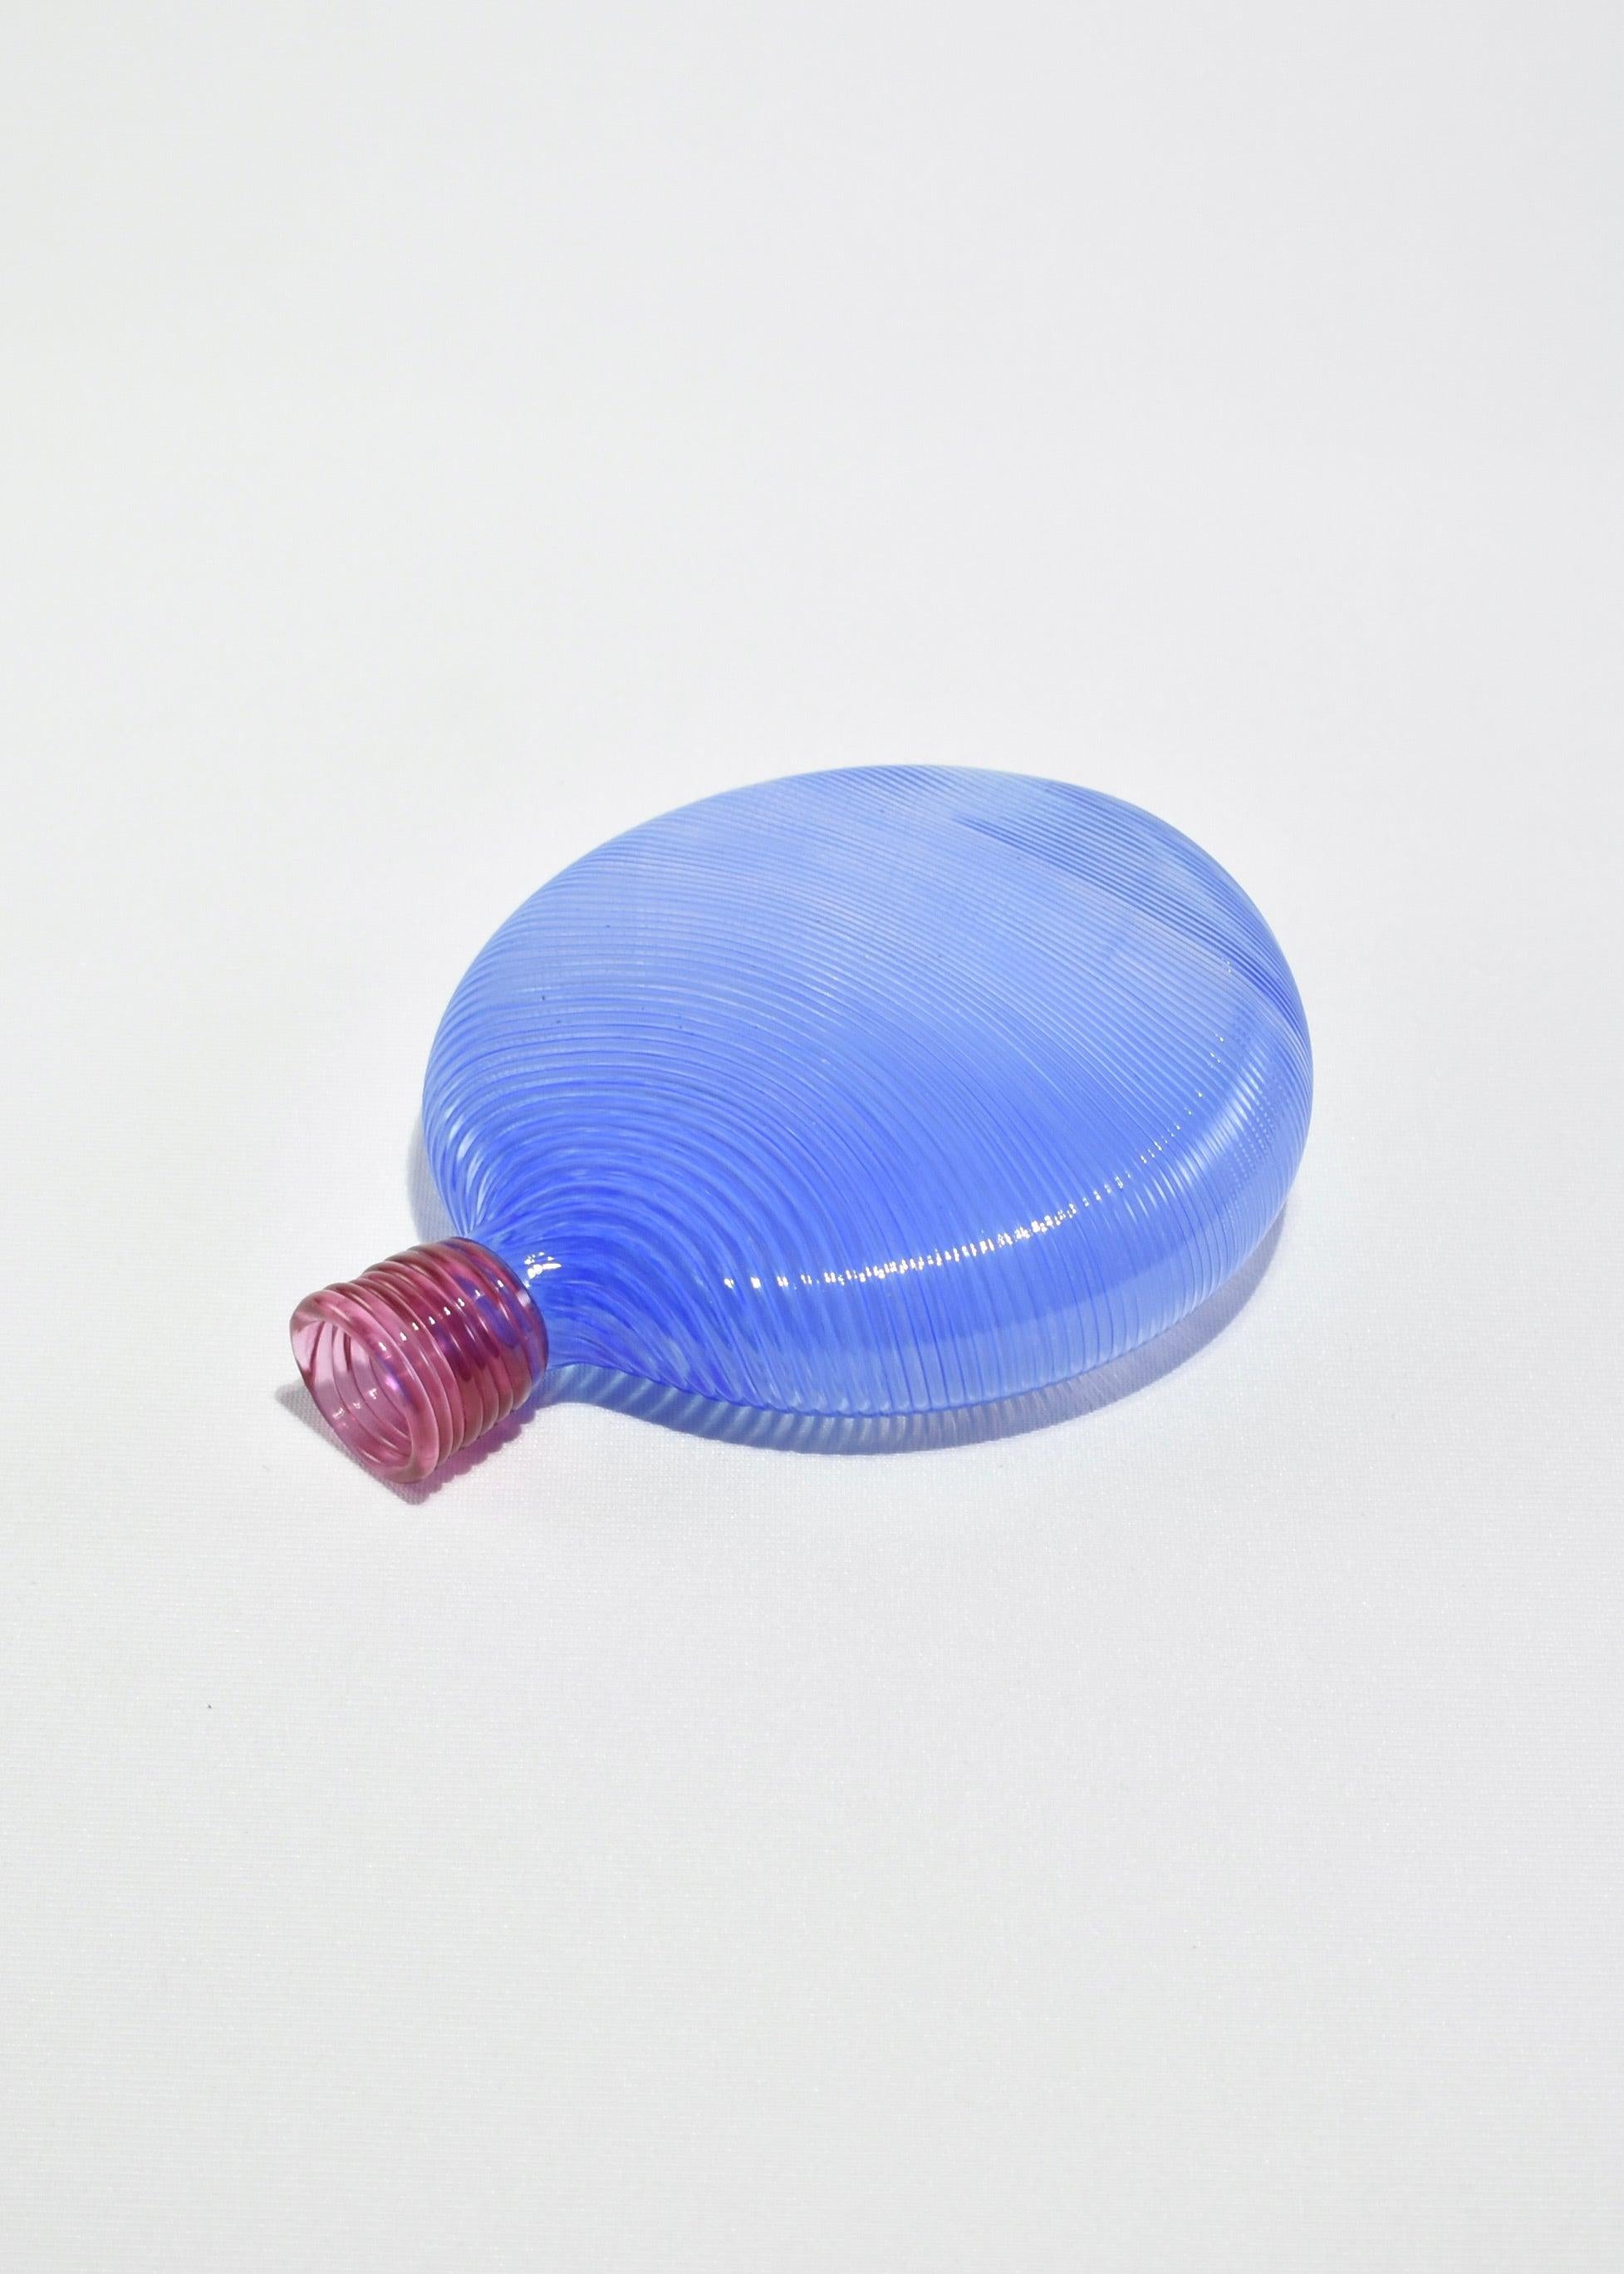 Beautiful blown glass stem vase in blue with pink detail. Signed on base.